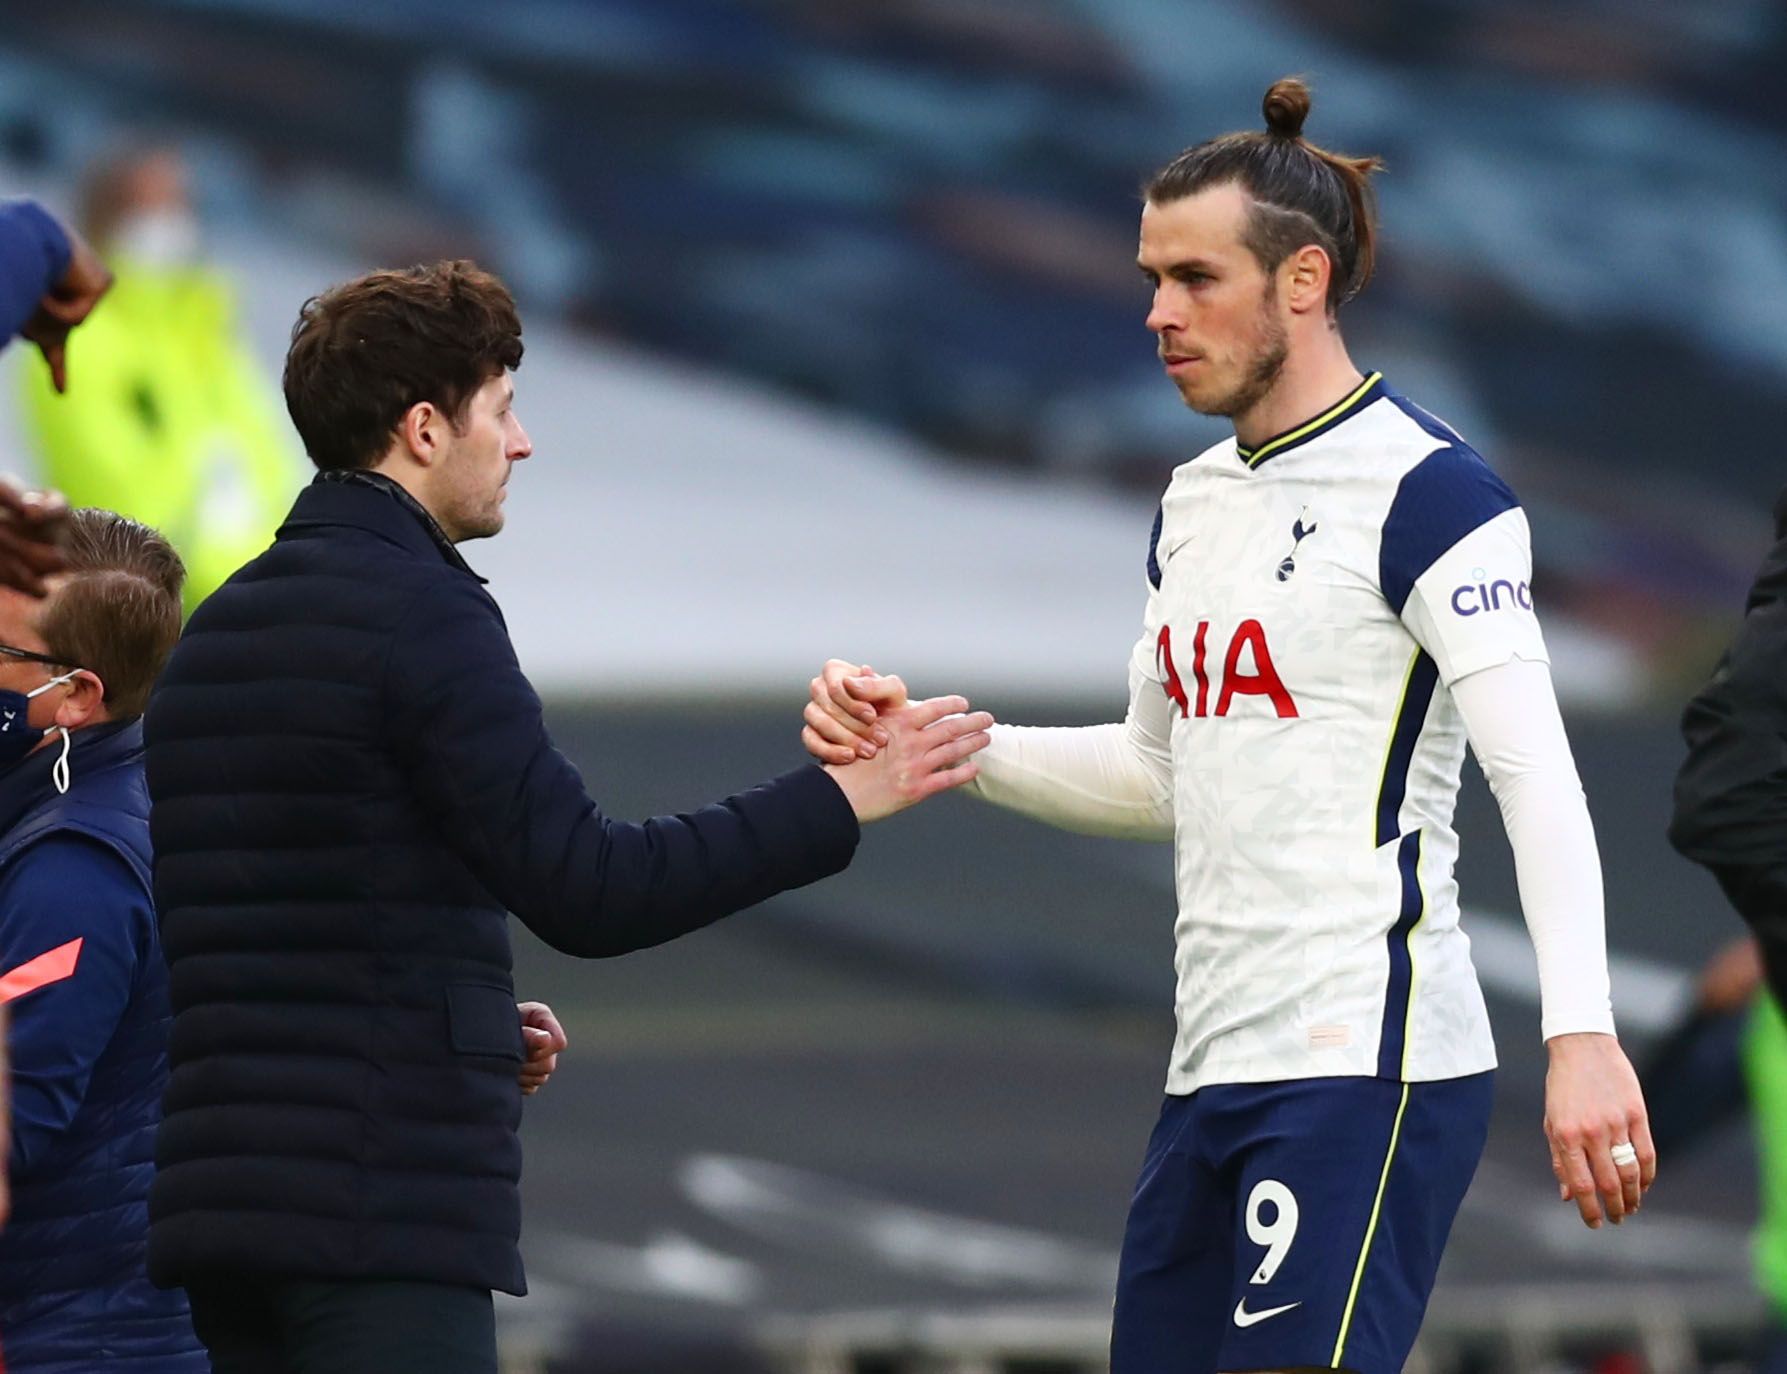 Soccer Football - Premier League - Tottenham Hotspur v Southampton - Tottenham Hotspur Stadium, London, Britain - April 21, 2021 Tottenham Hotspur's Gareth Bale shakes hands with interim manager Ryan Mason as he is substituted Pool via REUTERS/Clive Rose EDITORIAL USE ONLY. No use with unauthorized audio, video, data, fixture lists, club/league logos or 'live' services. Online in-match use limited to 75 images, no video emulation. No use in betting, games or single club /league/player publicatio